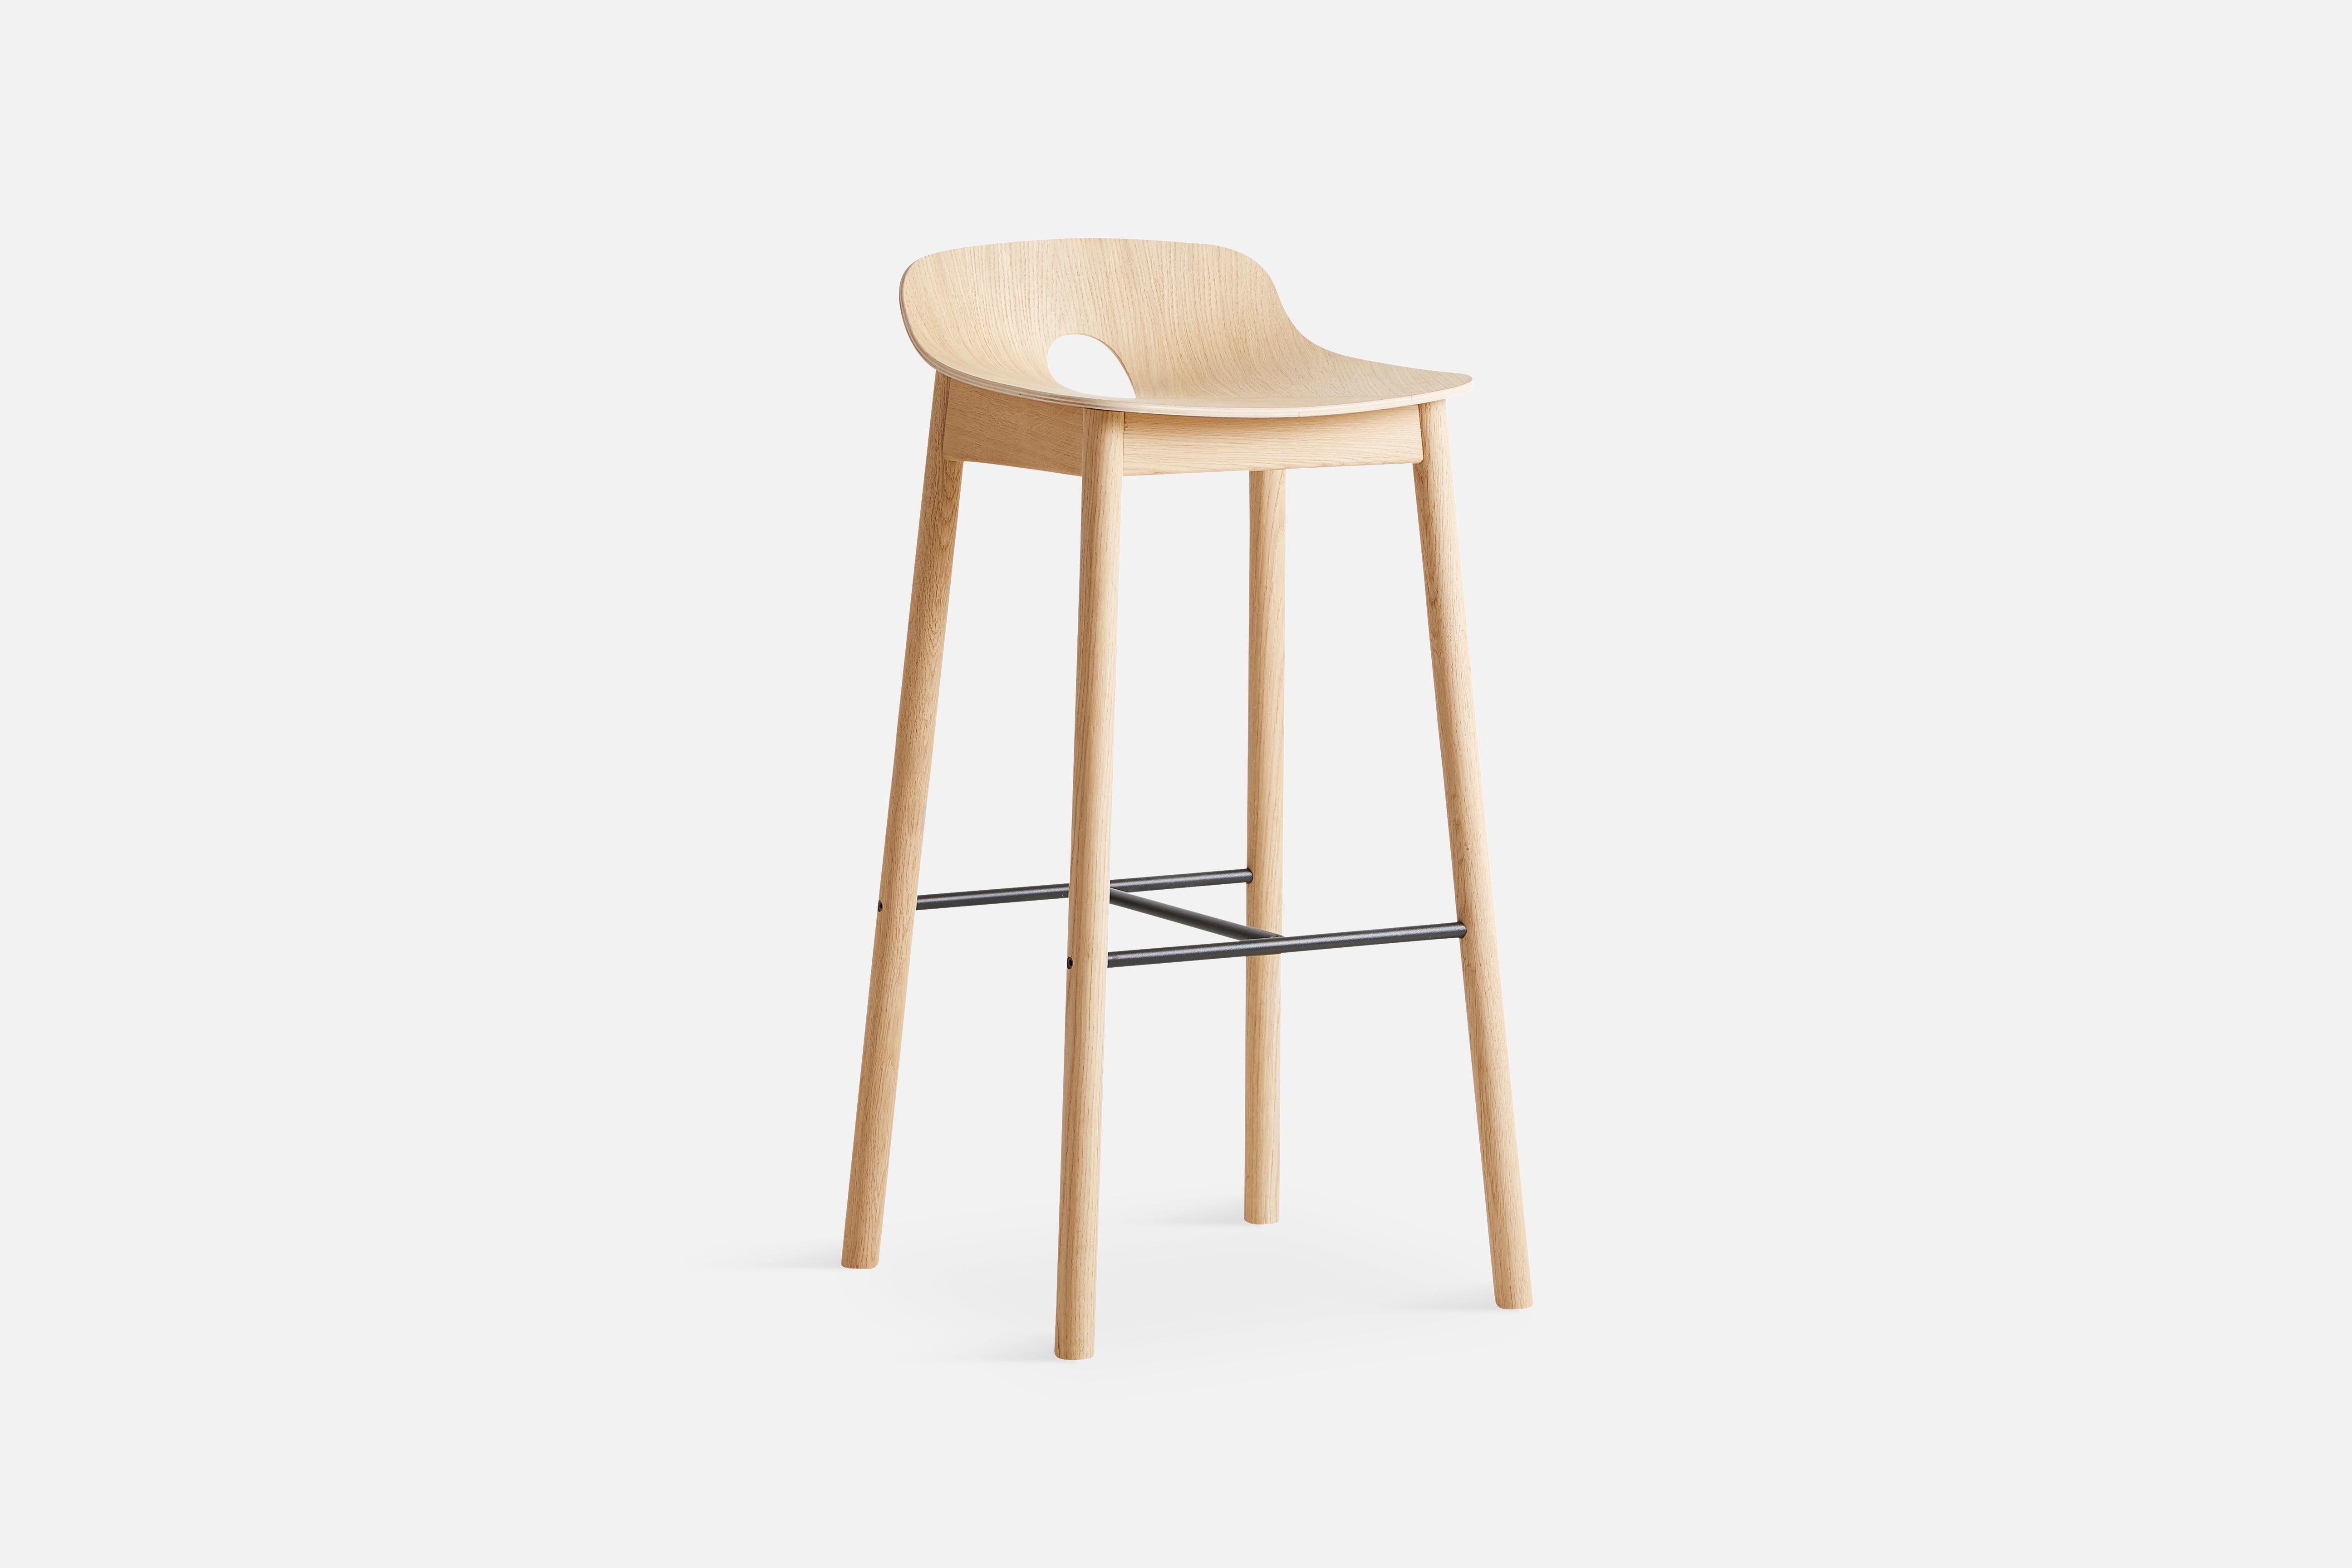 White oak mono bar stool by Kasper Nyman.
Materials: plywood with oak veneer.
Dimensions: D 44.7 x W 43.7 x H 87.6 cm.

The founders, Mia and Torben Koed, decided to put their 30 years of experience into a new project. It was time for a change